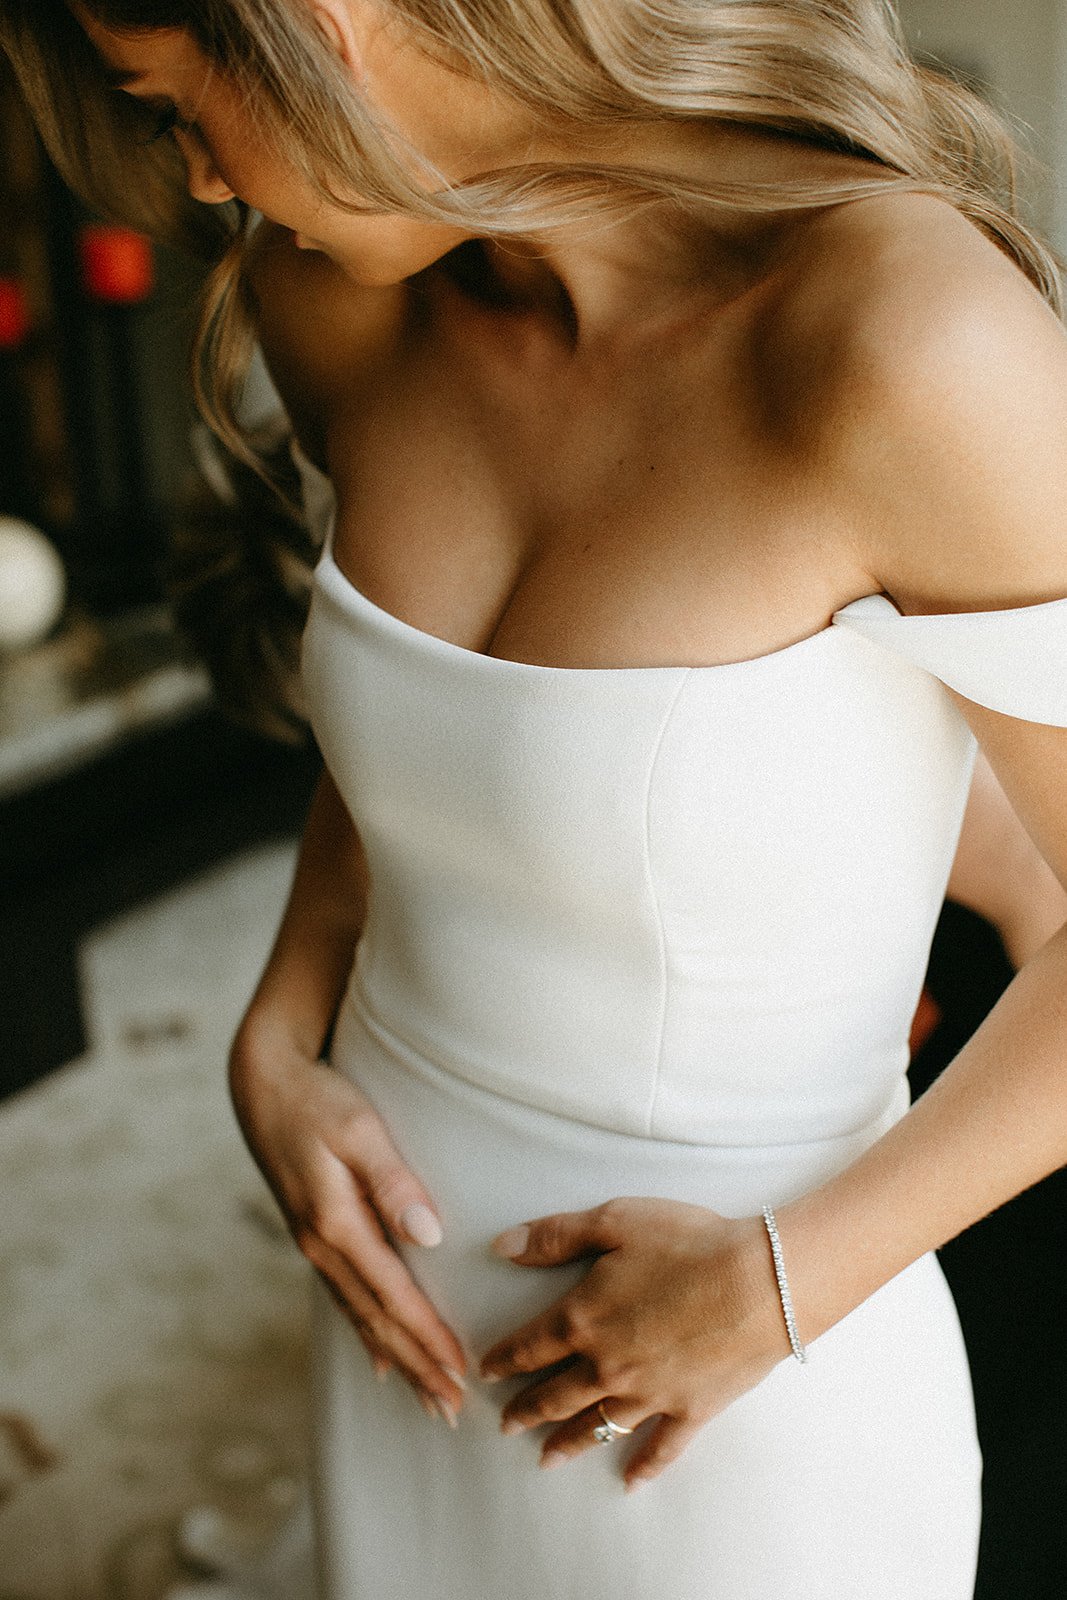  A bride wearing Alyssa Kristin Camila wedding dress, which is a fitted natural white silk crepe wedding dress with off the shoulder sleeves. She has long brown hair styled in soft curls and is wearing a diamond tennis bracelet. 